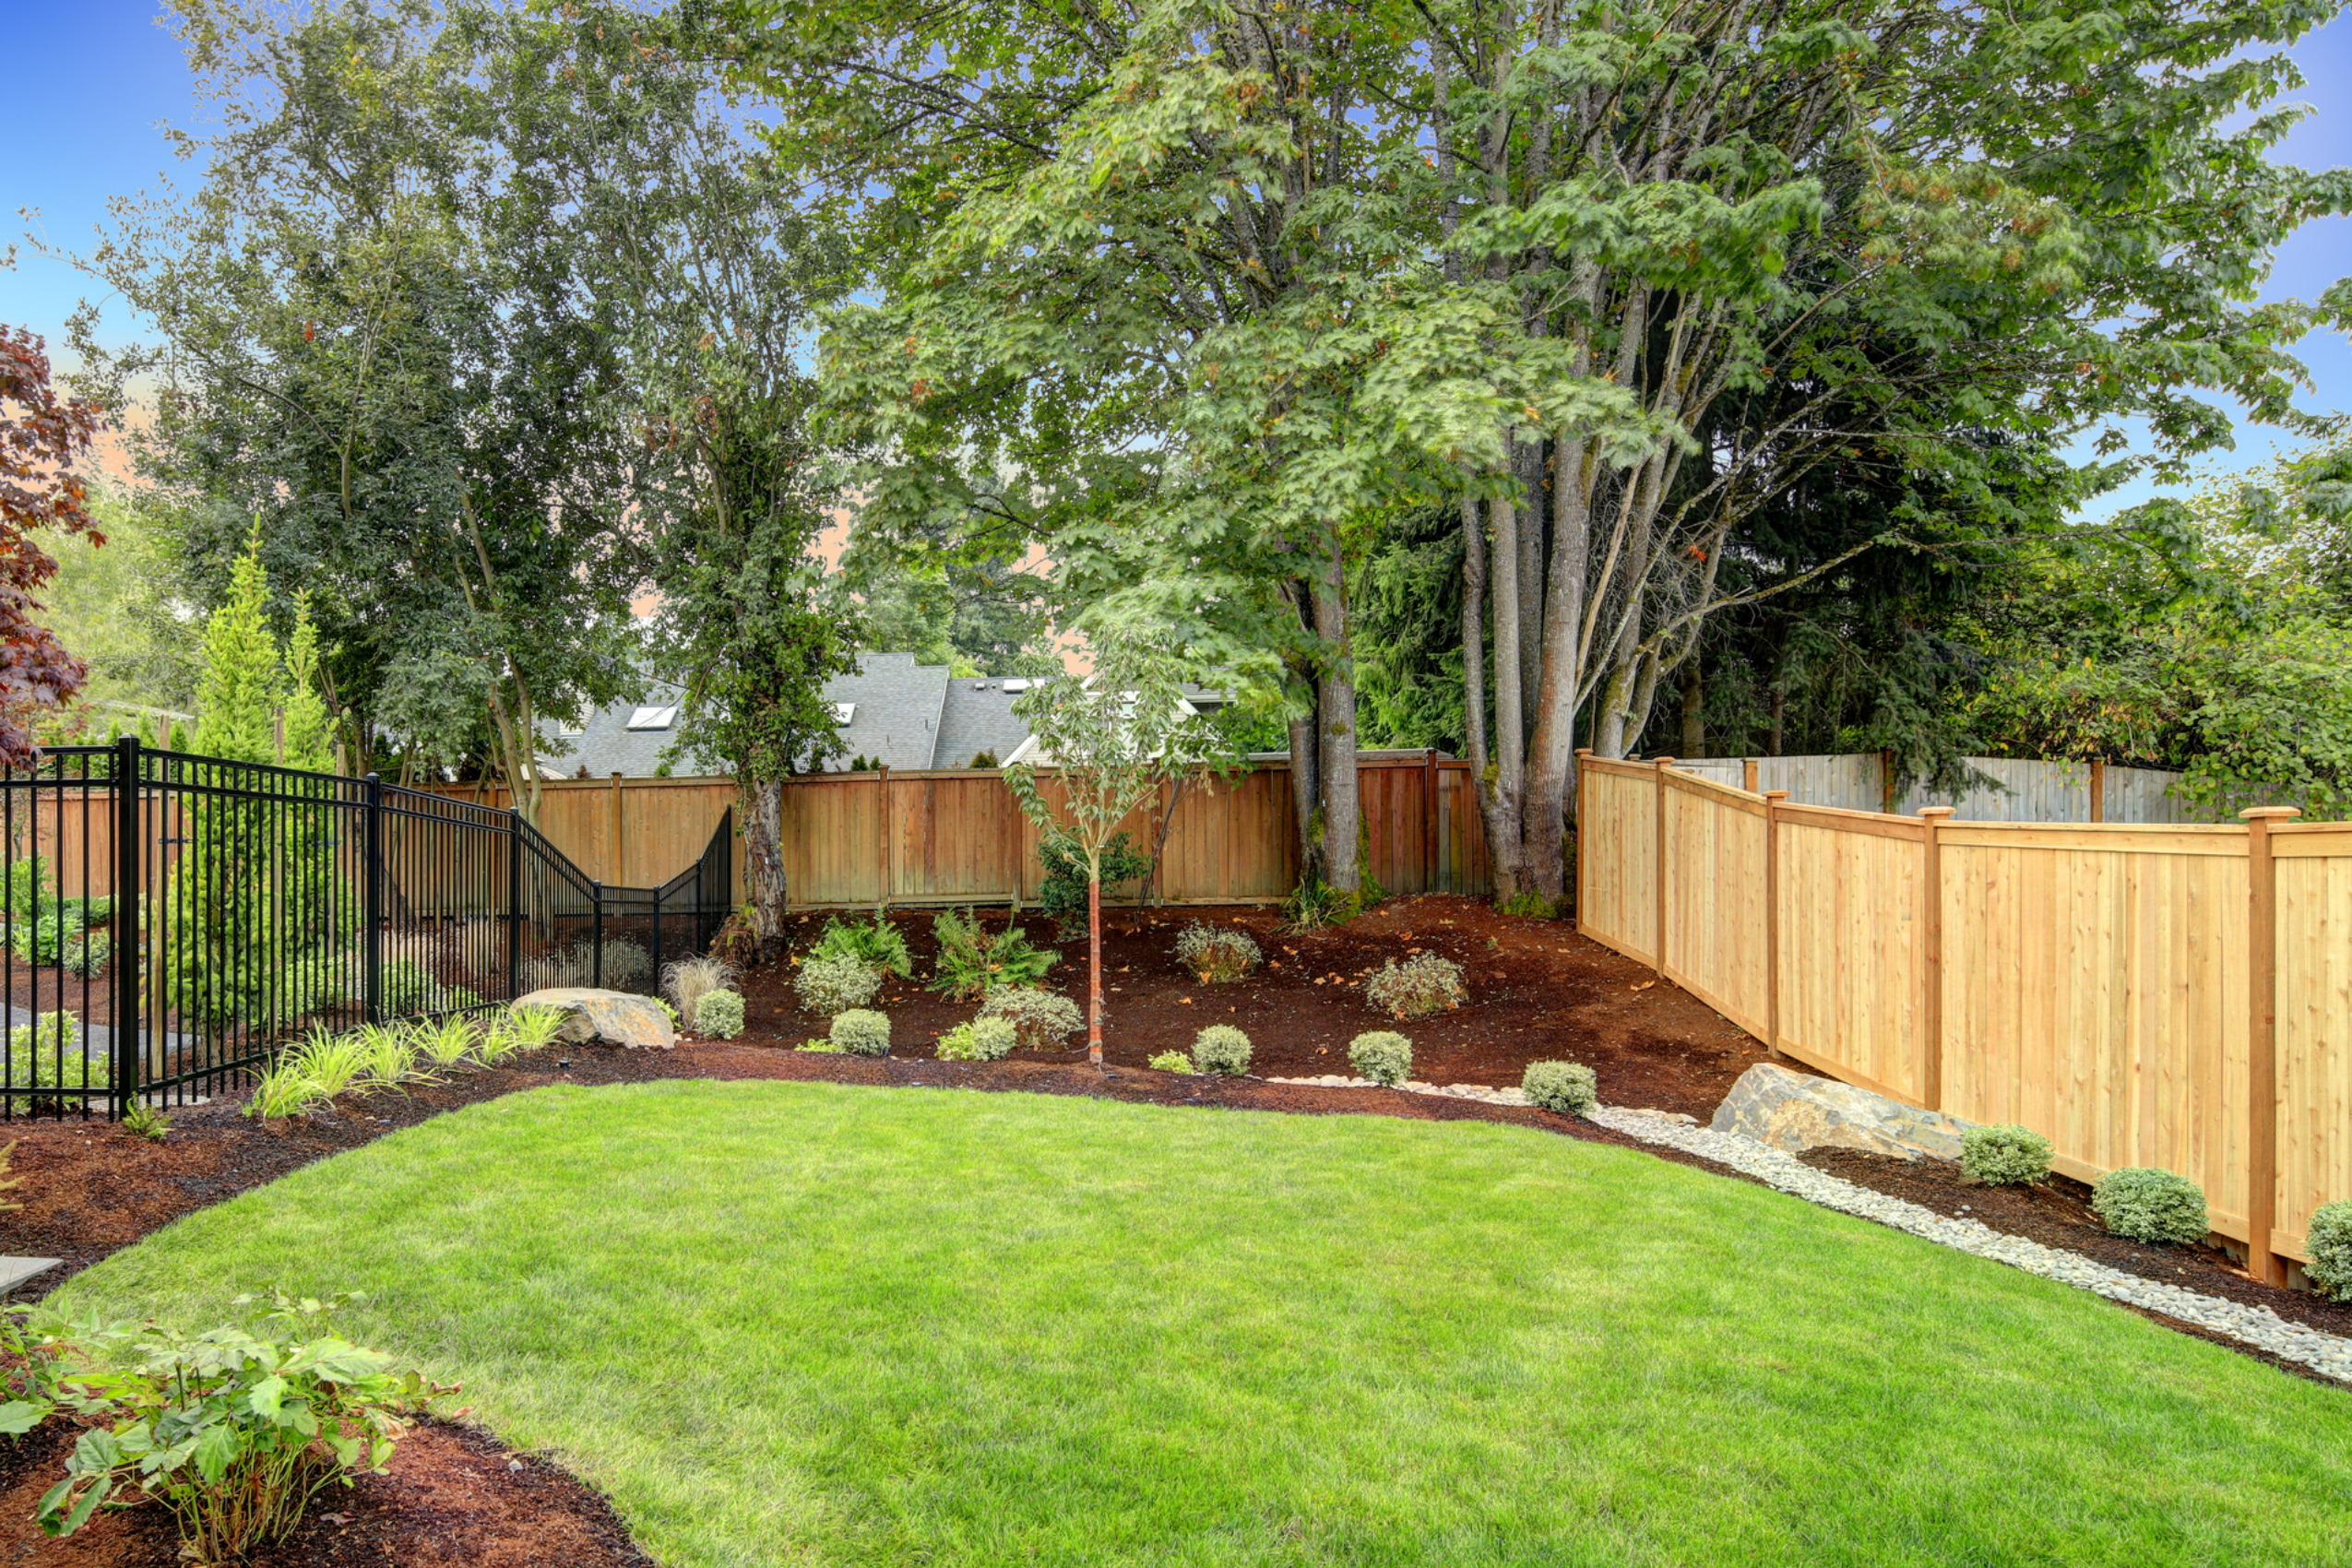 backyard with plant landscaping surrounded by a fence